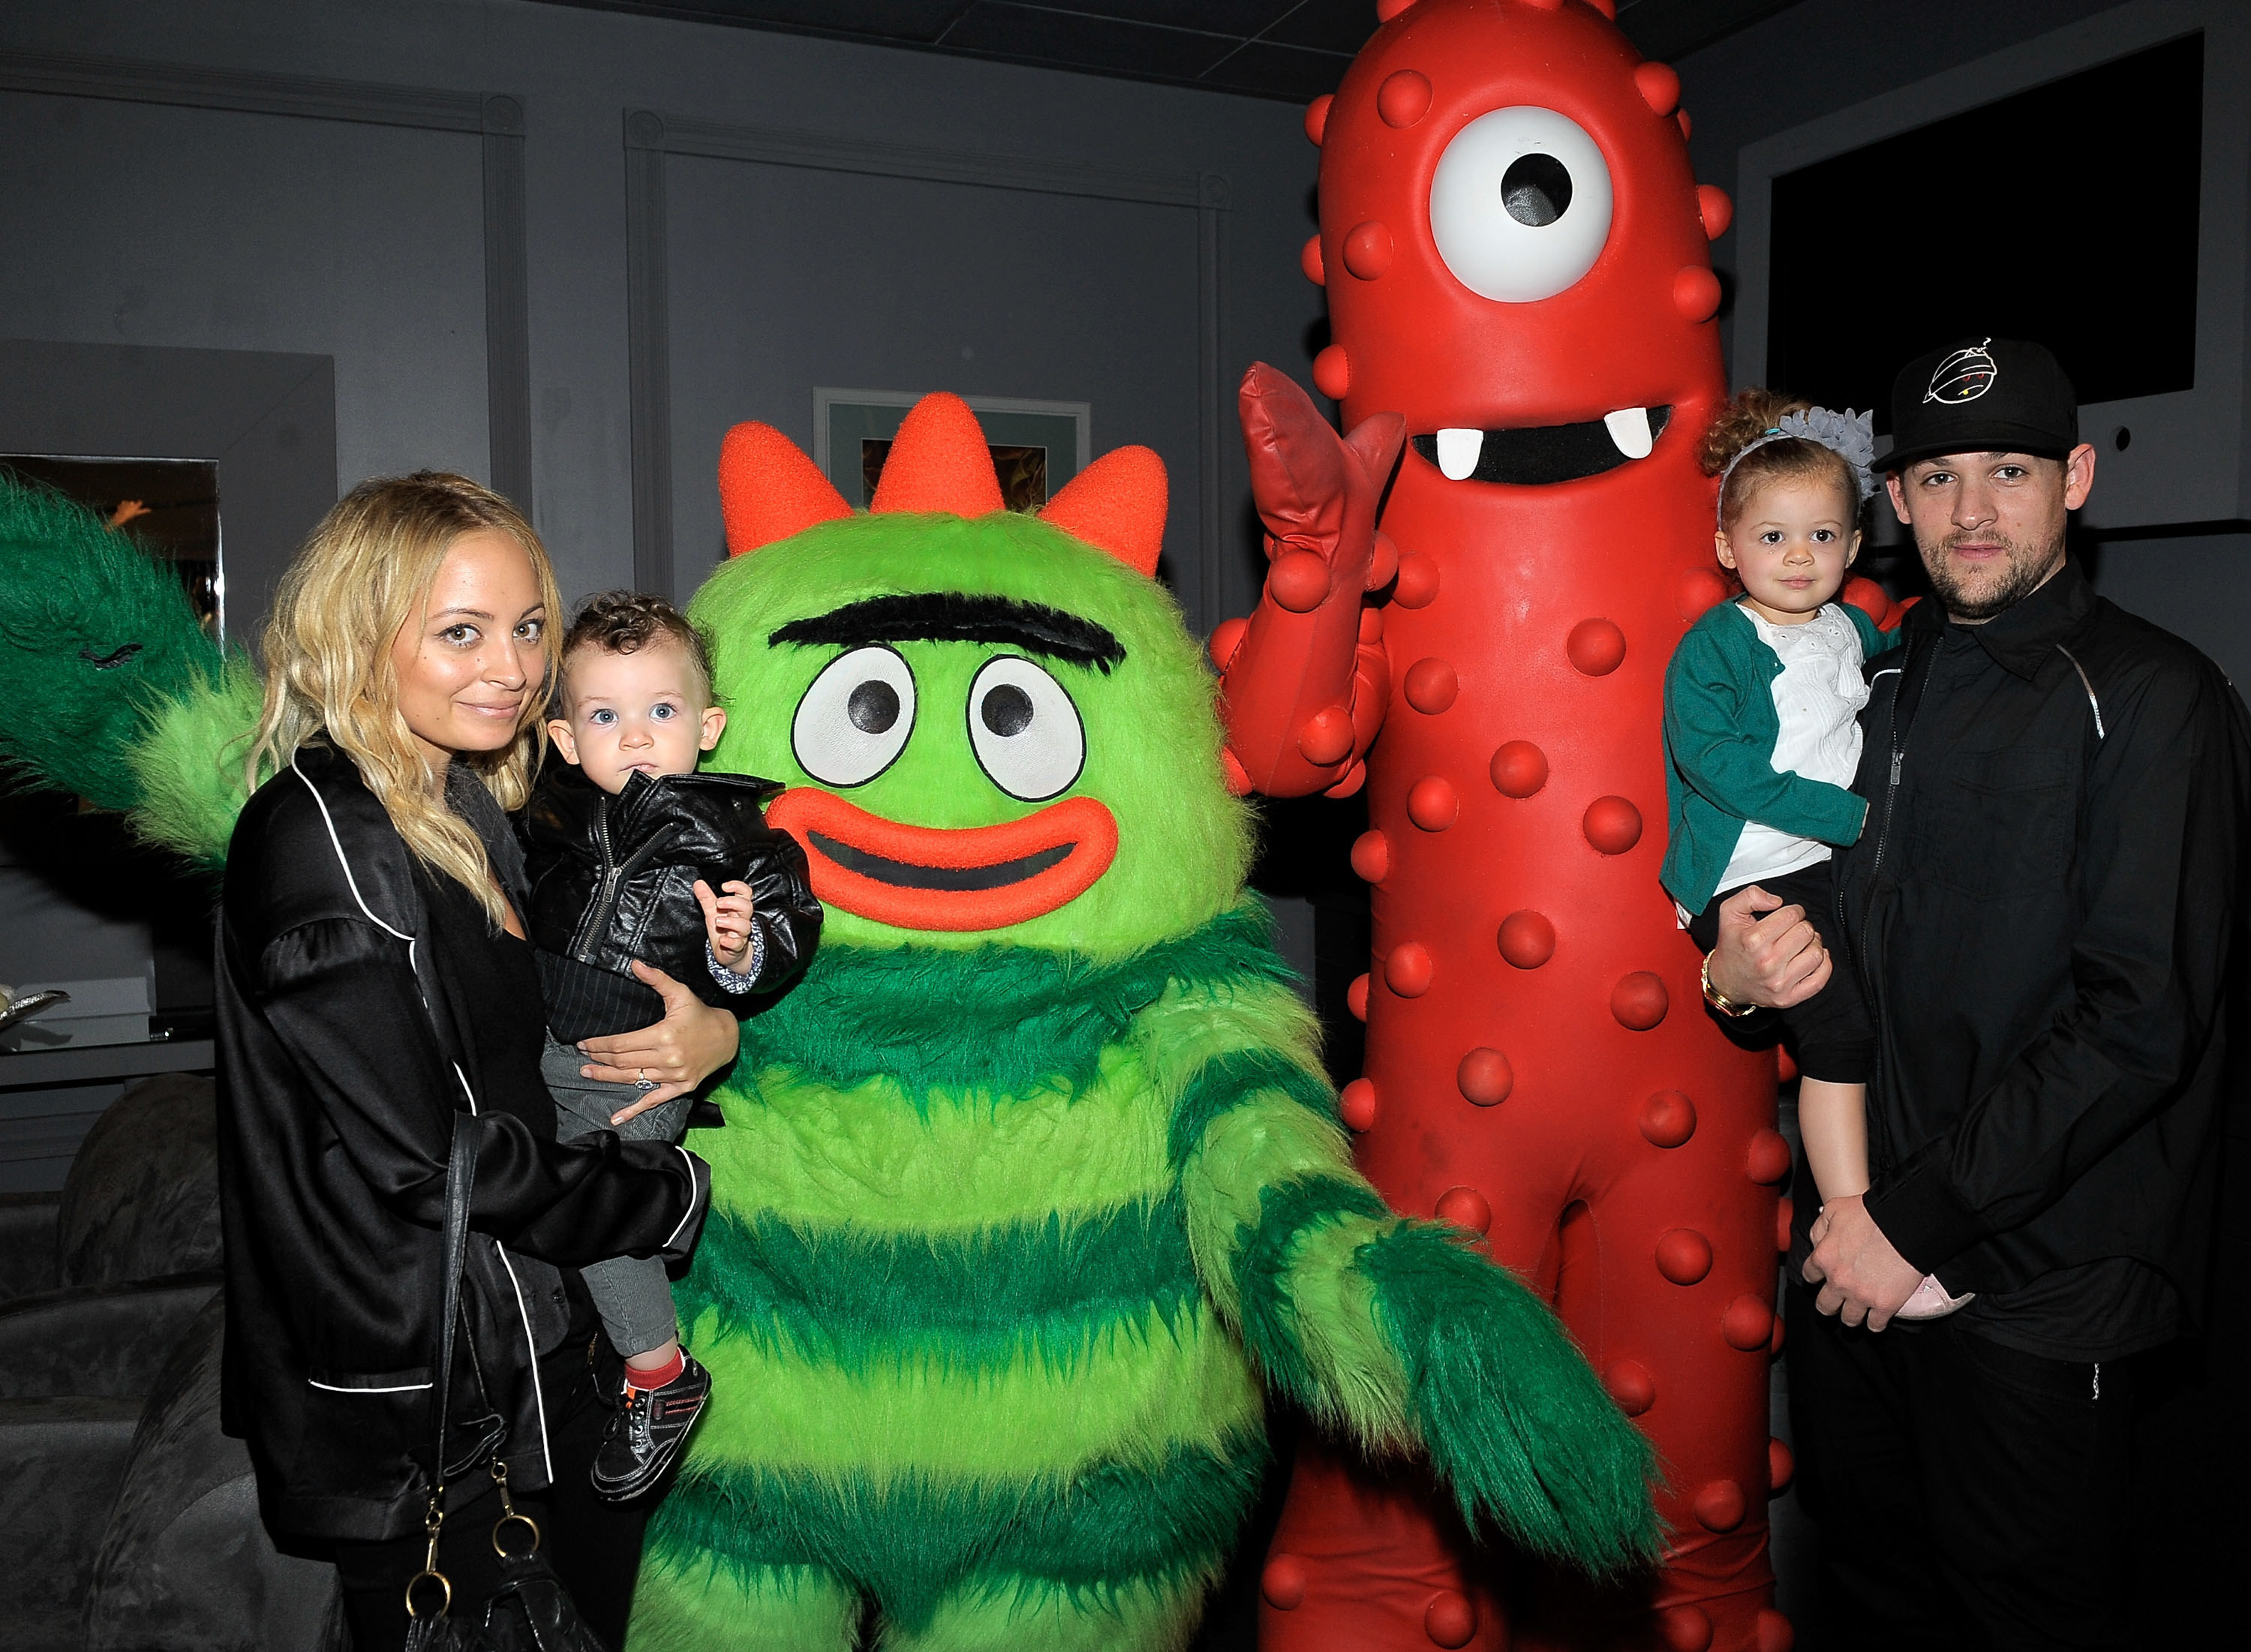 Nicole Richie, son Sparrow Madden, daughter Harlow Madden and husband musician Joel Madden pose with YO GABBA GABBA! characters